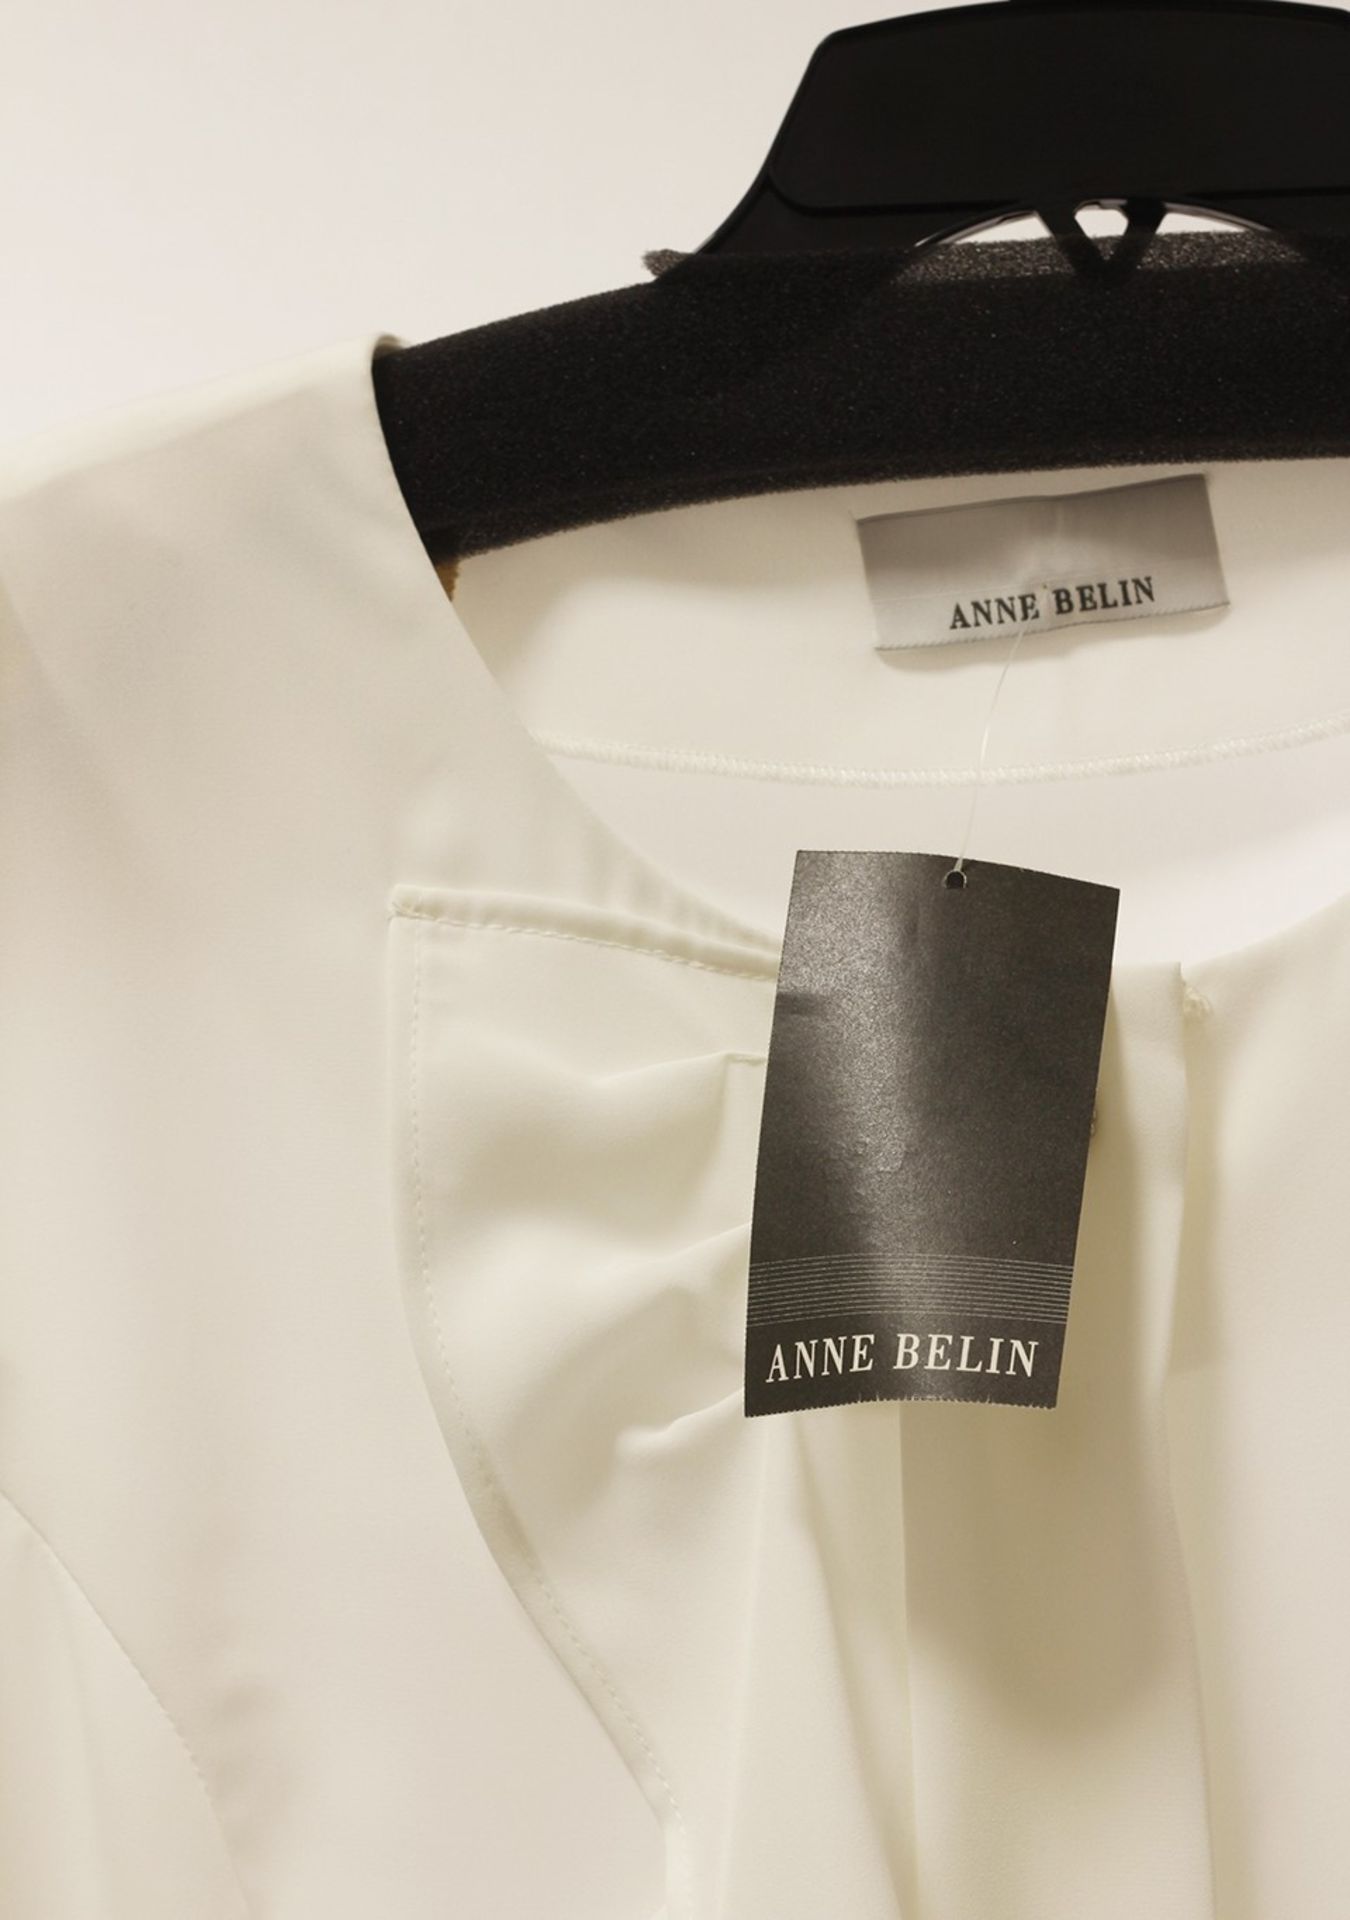 1 x Anne Belin White Shirt - Size: 18 - Material: 100% Polyester - From a High End Clothing Boutique - Image 3 of 9